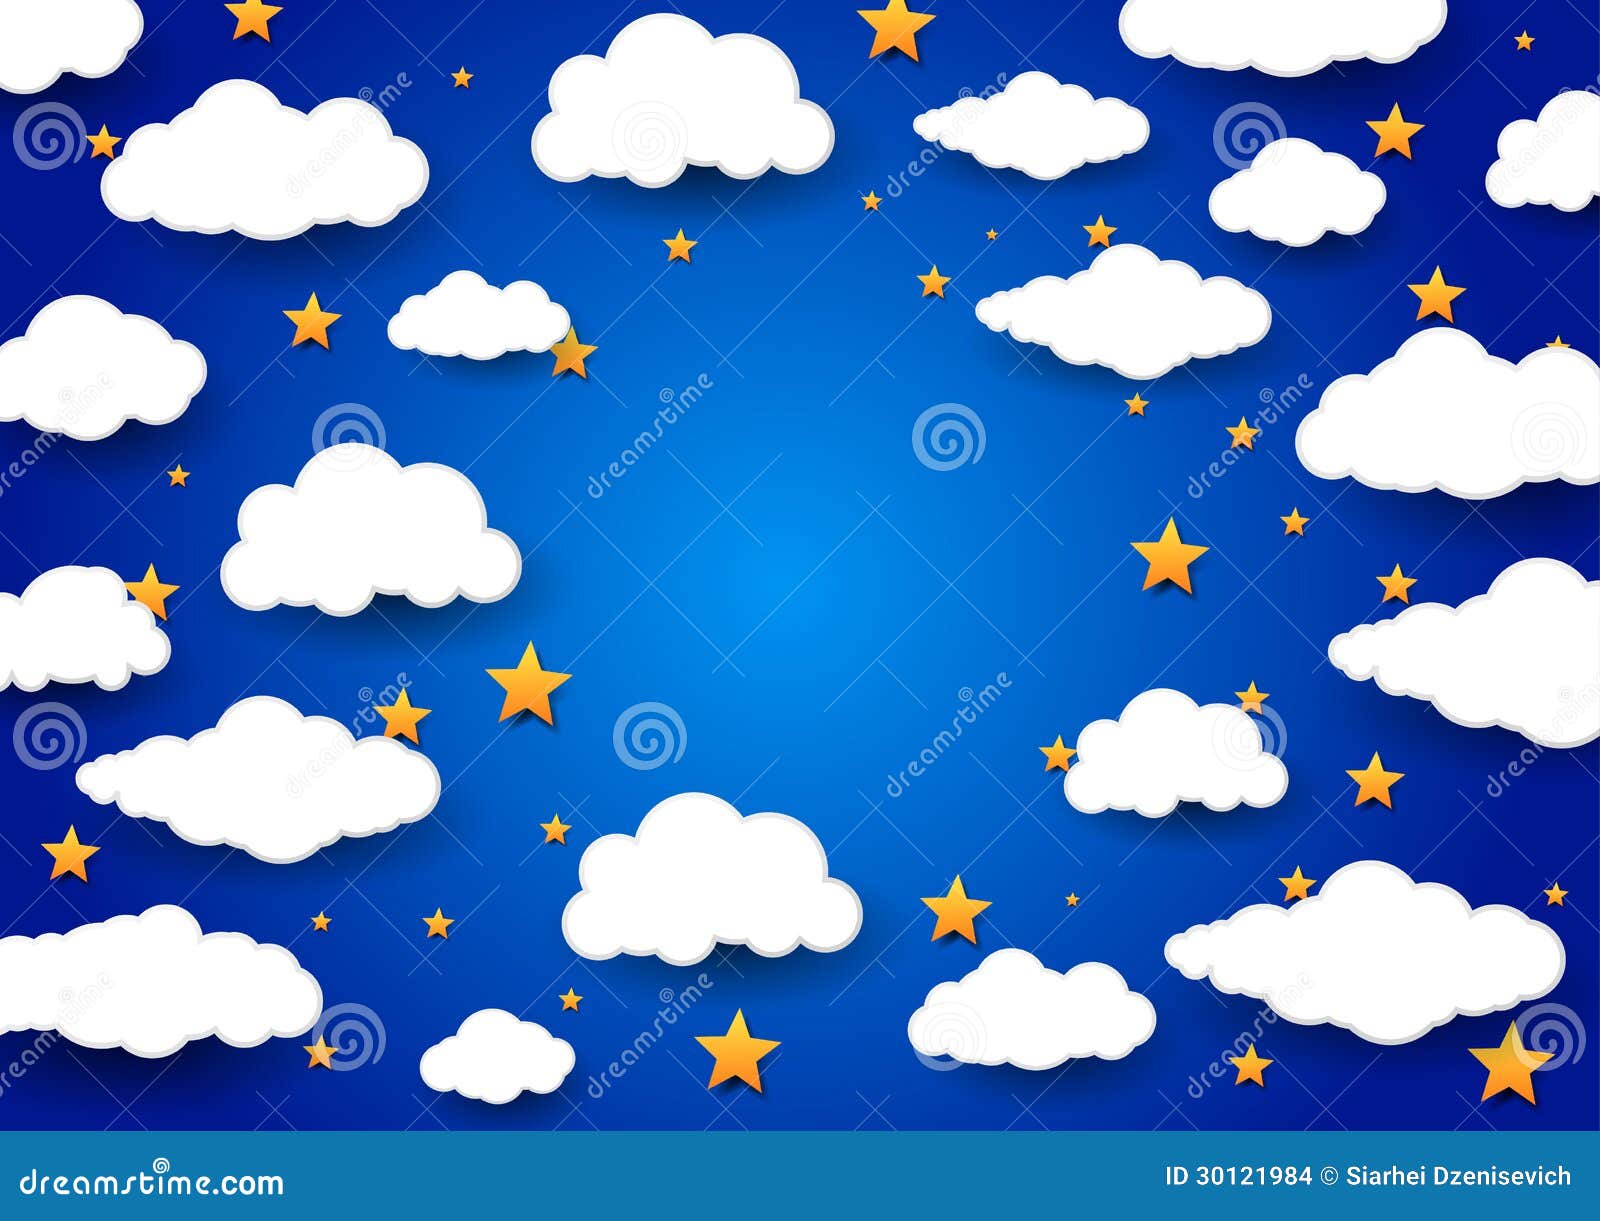 space clipart background - photo #47